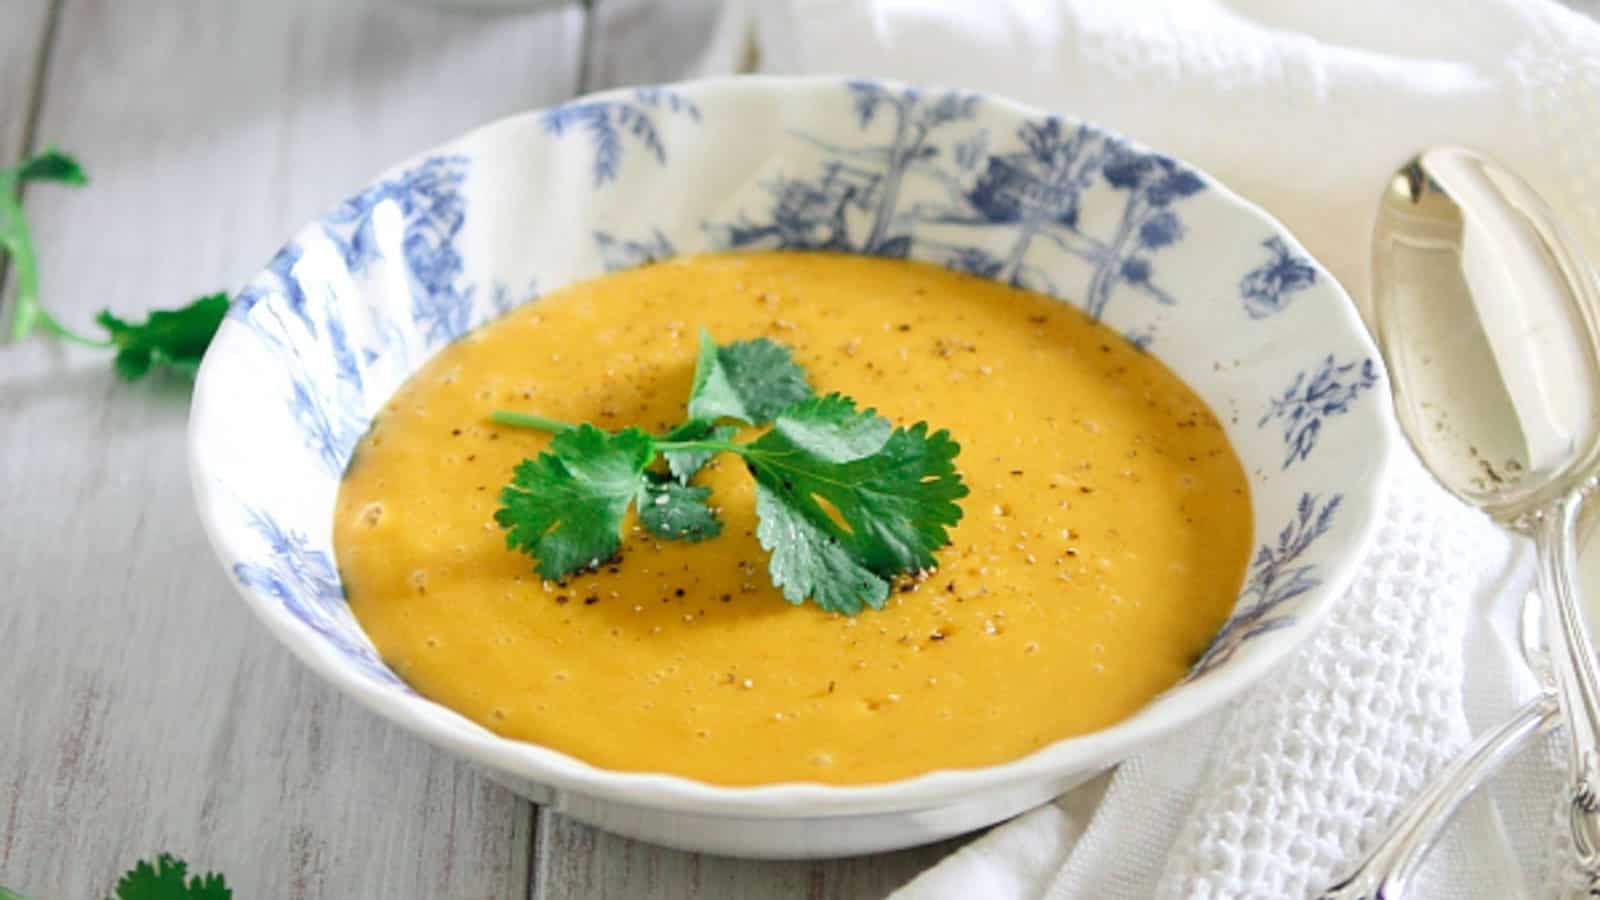 Pumpkin potato blender soup in a blue and white bowl garnished with fresh parsley.